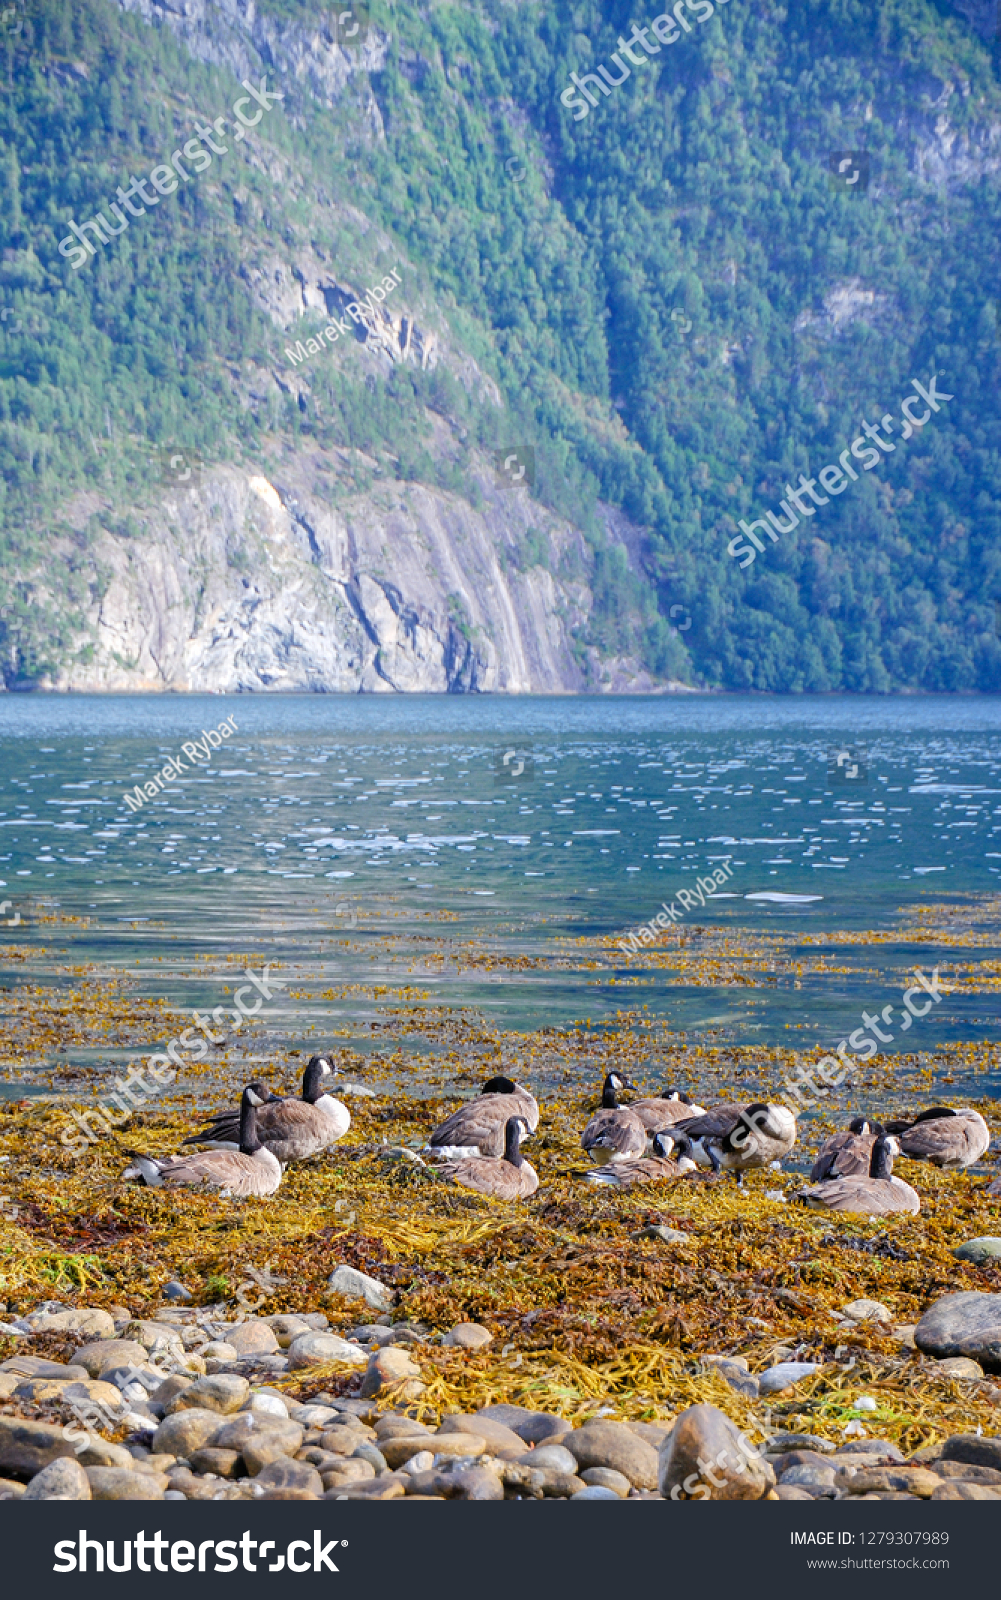 The Canada goose (Branta canadensis) is a large wild goose species. Birds in fjord environment. Norway. Sea water.  #1279307989